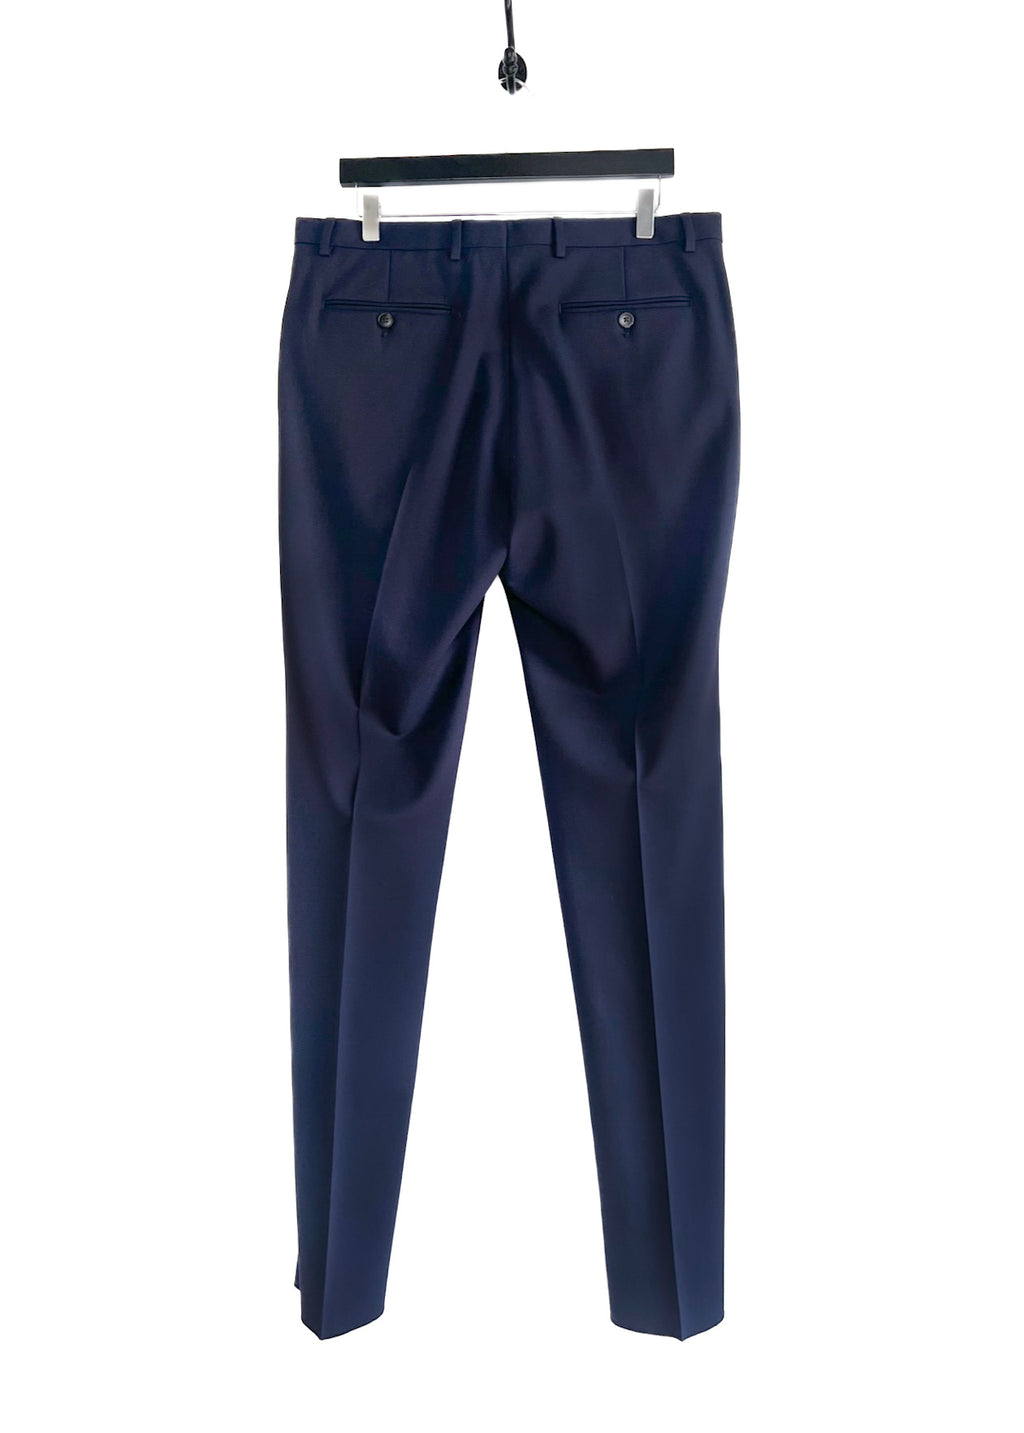 Gucci Navy Blue Wool Blend Classic Trousers